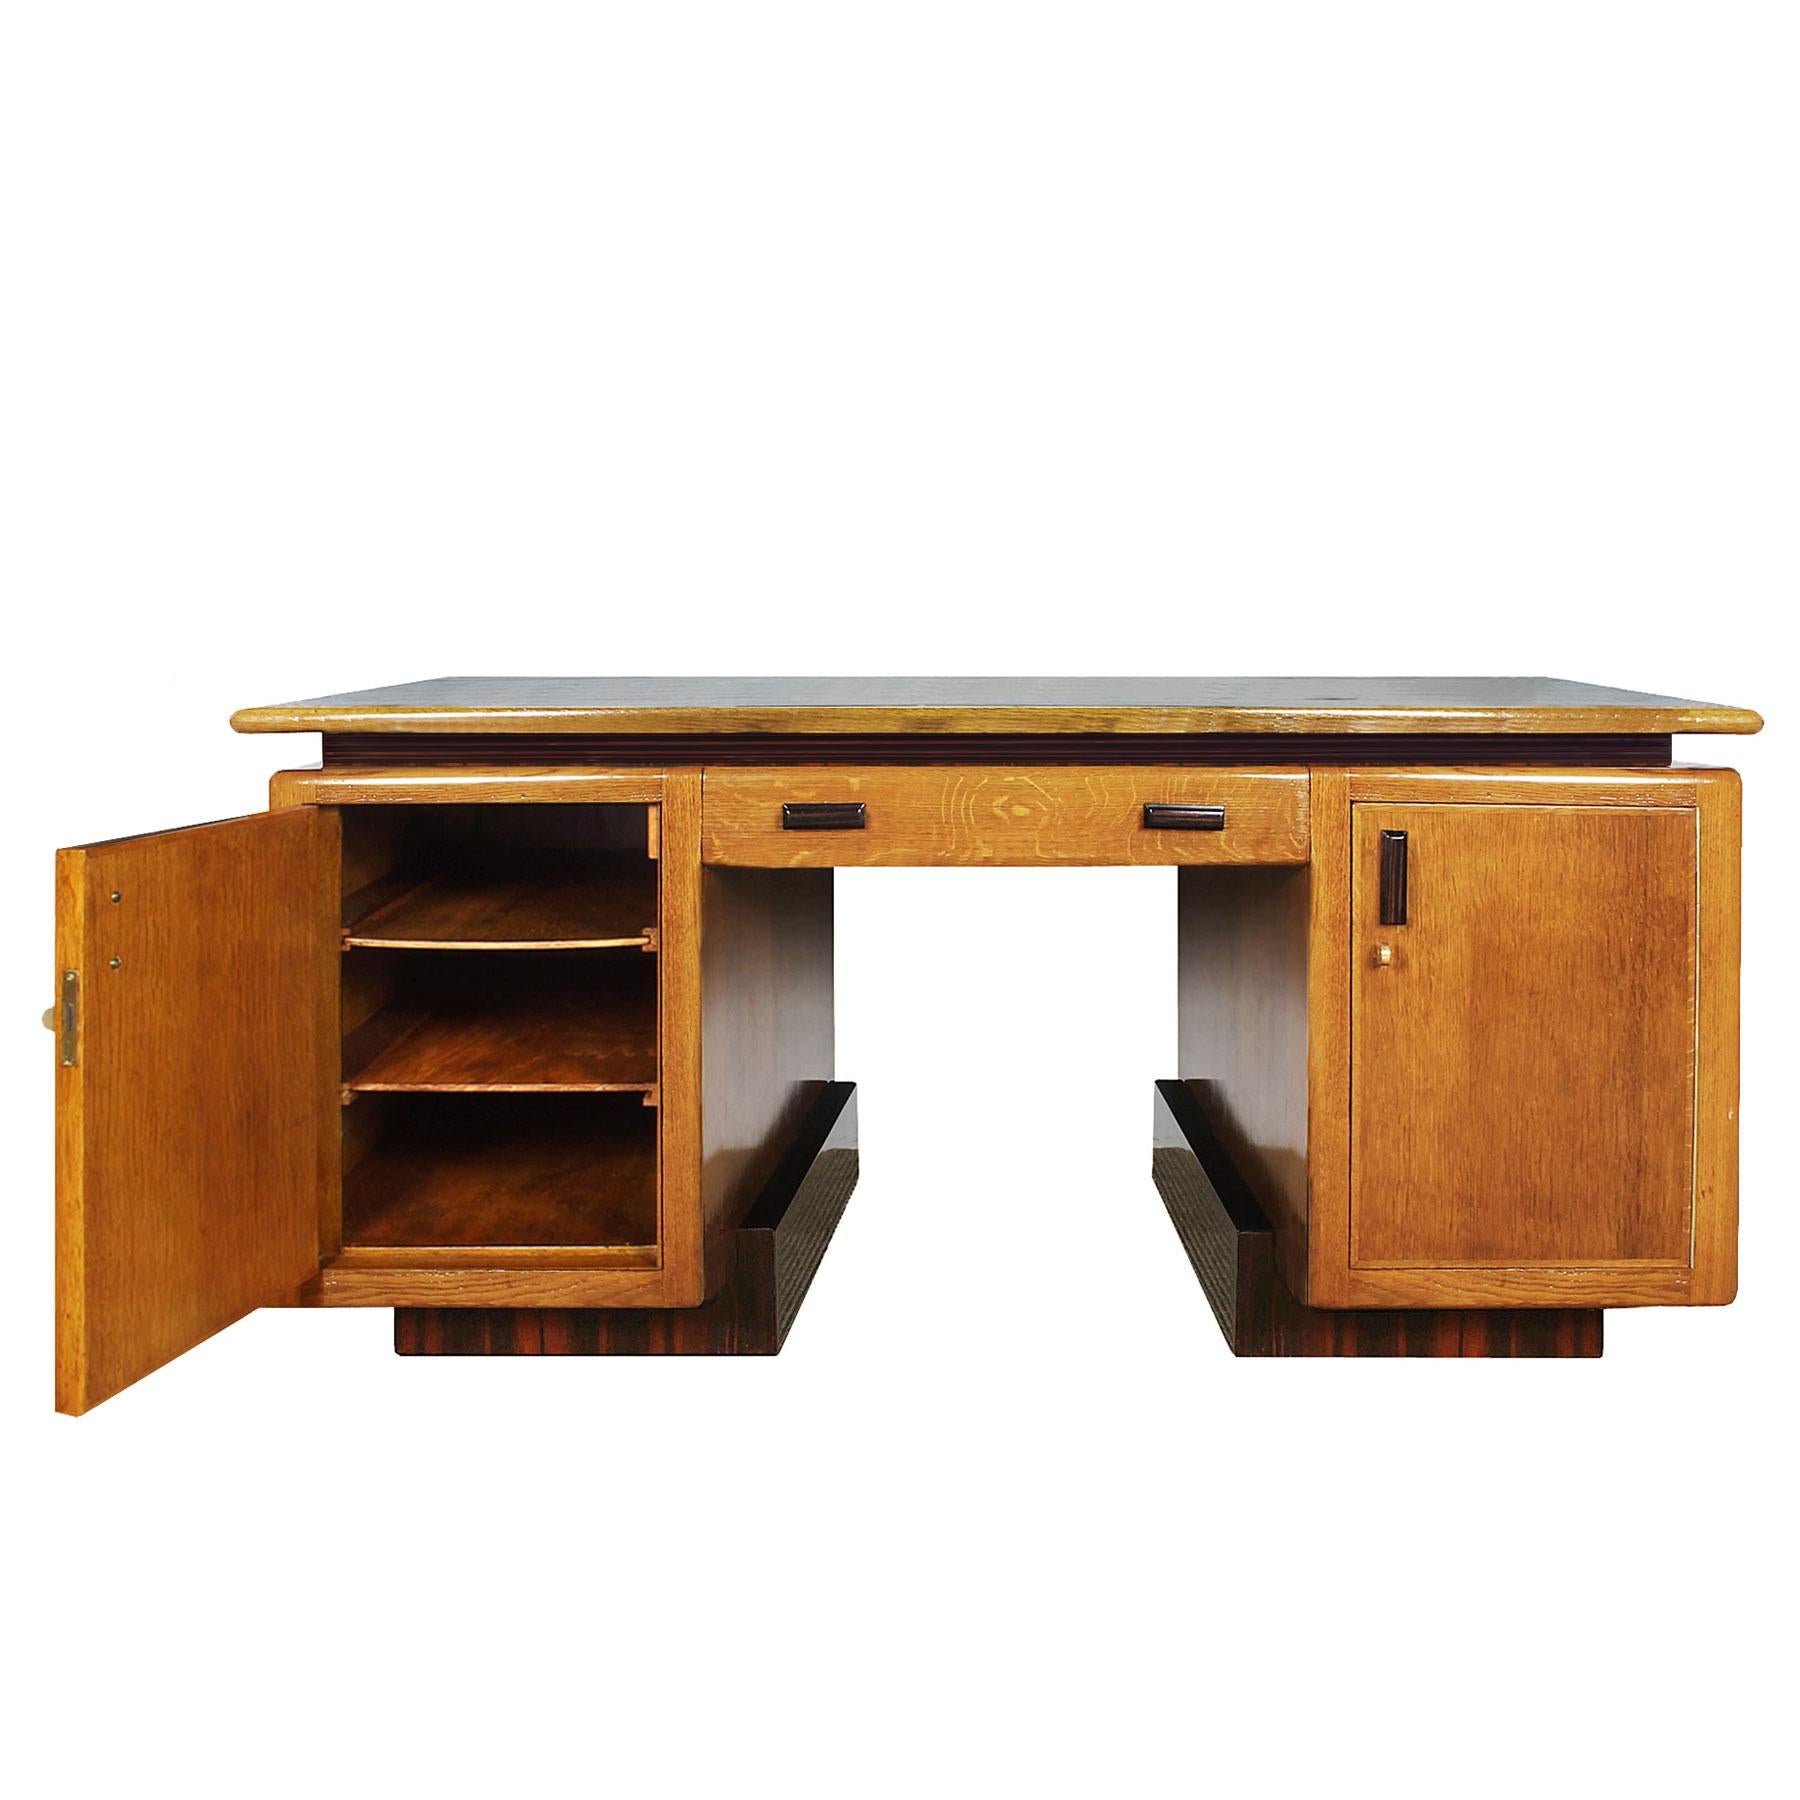 Expressionist 1920s Amsterdam School Desk In Oakwood, Macassar Ebony and Leather - Netherlands For Sale